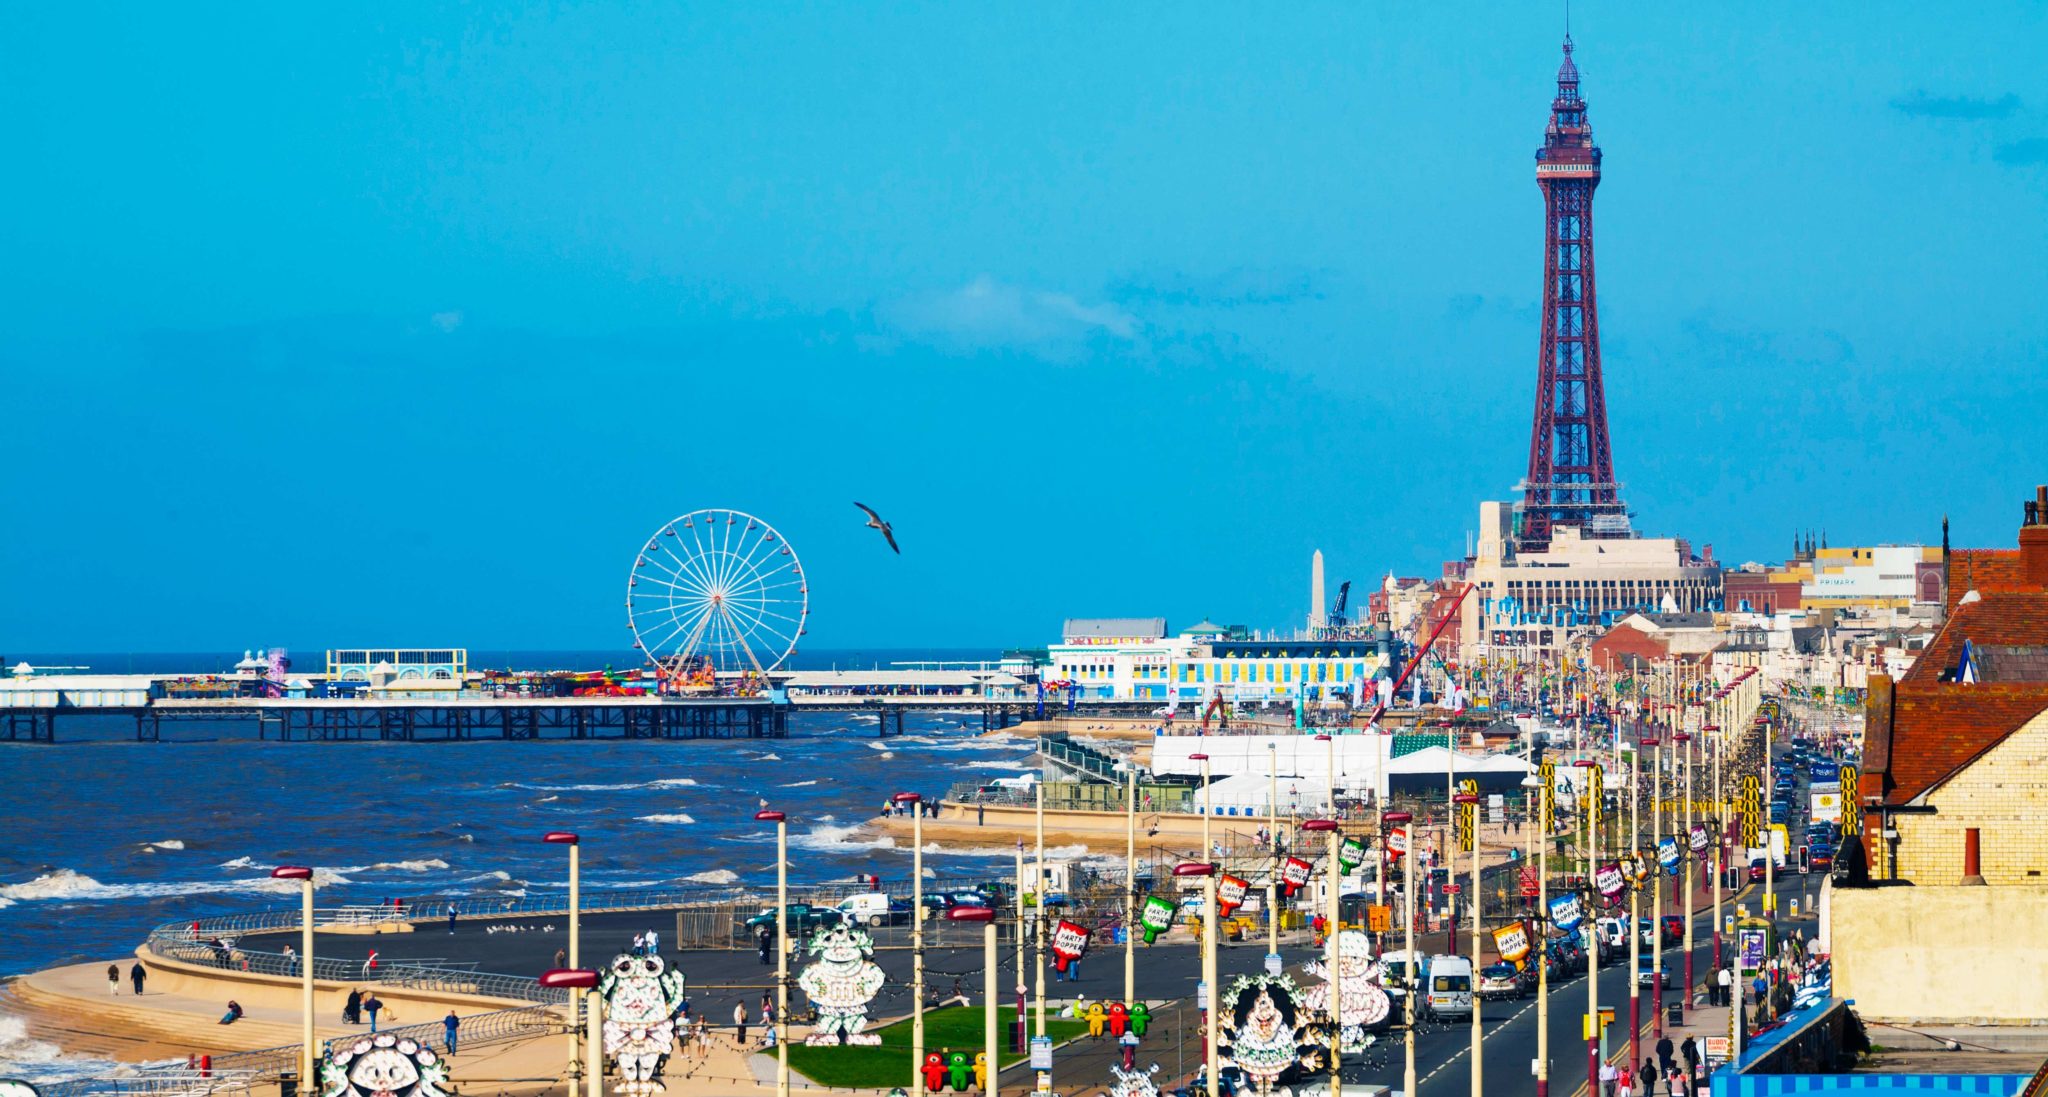 day trips to blackpool illuminations from manchester